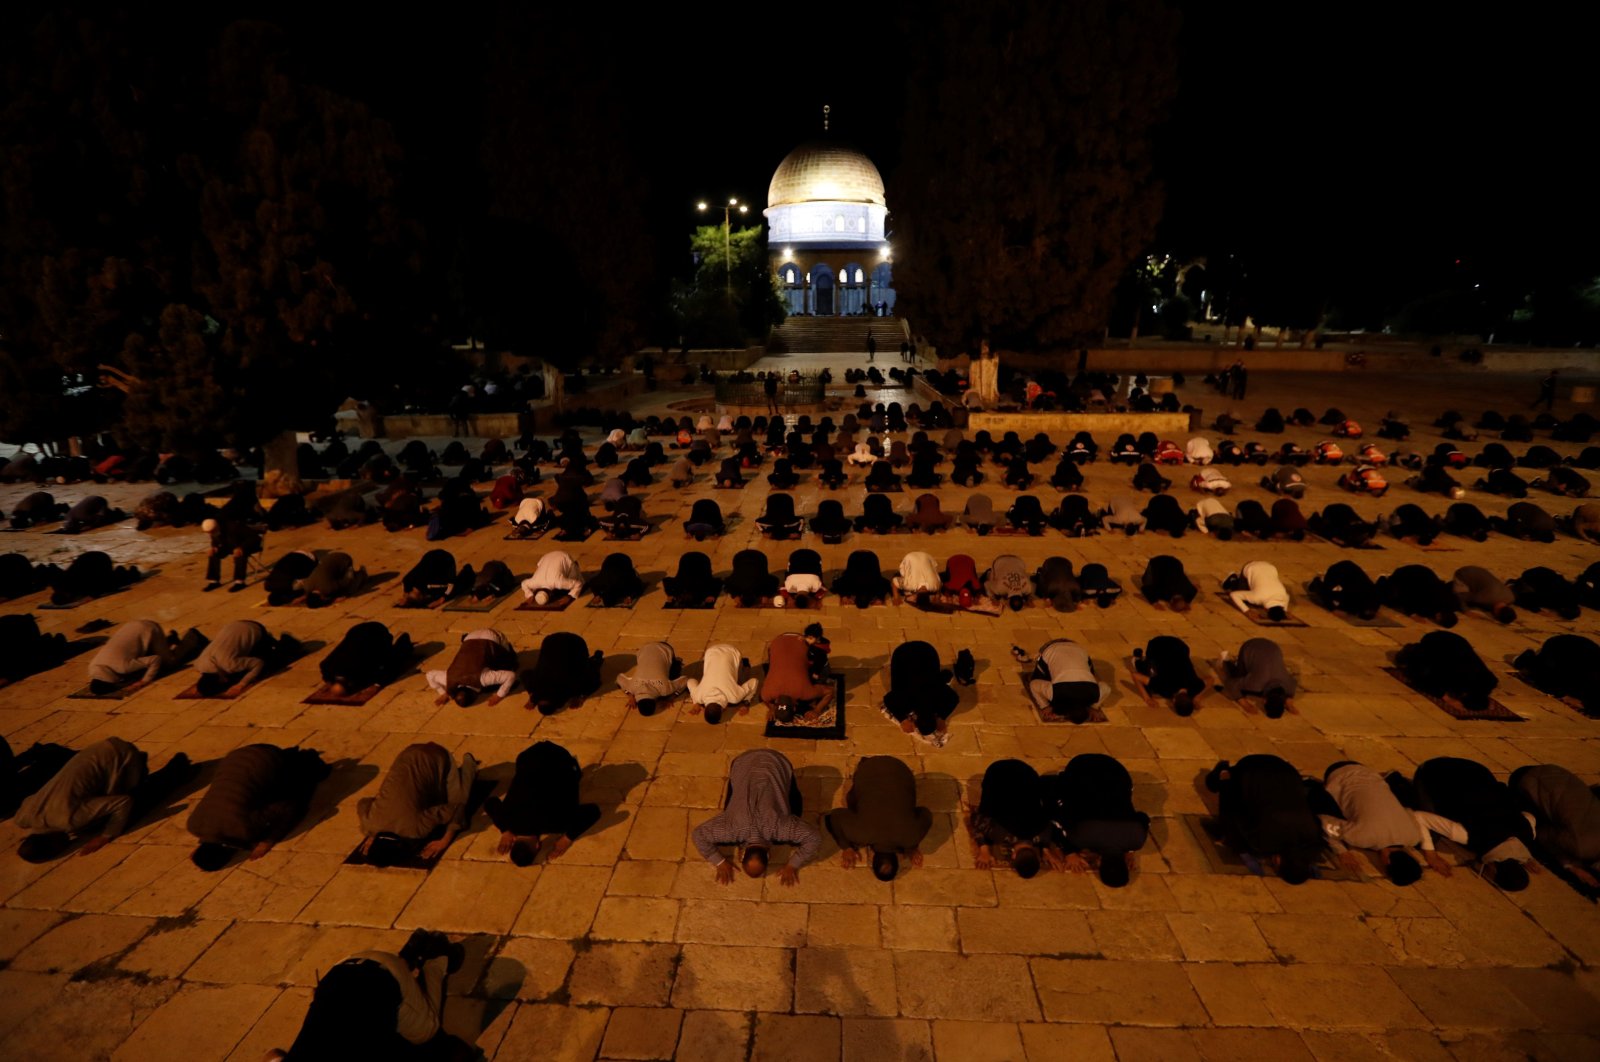 Palestinian worshippers pray at the al-Aqsa mosque compound, Islam's third holiest site, in Jerusalem's Old City on June 1, 2020,  after a two-month closure due to the COVID-19 pandemic. (AFP Photo)